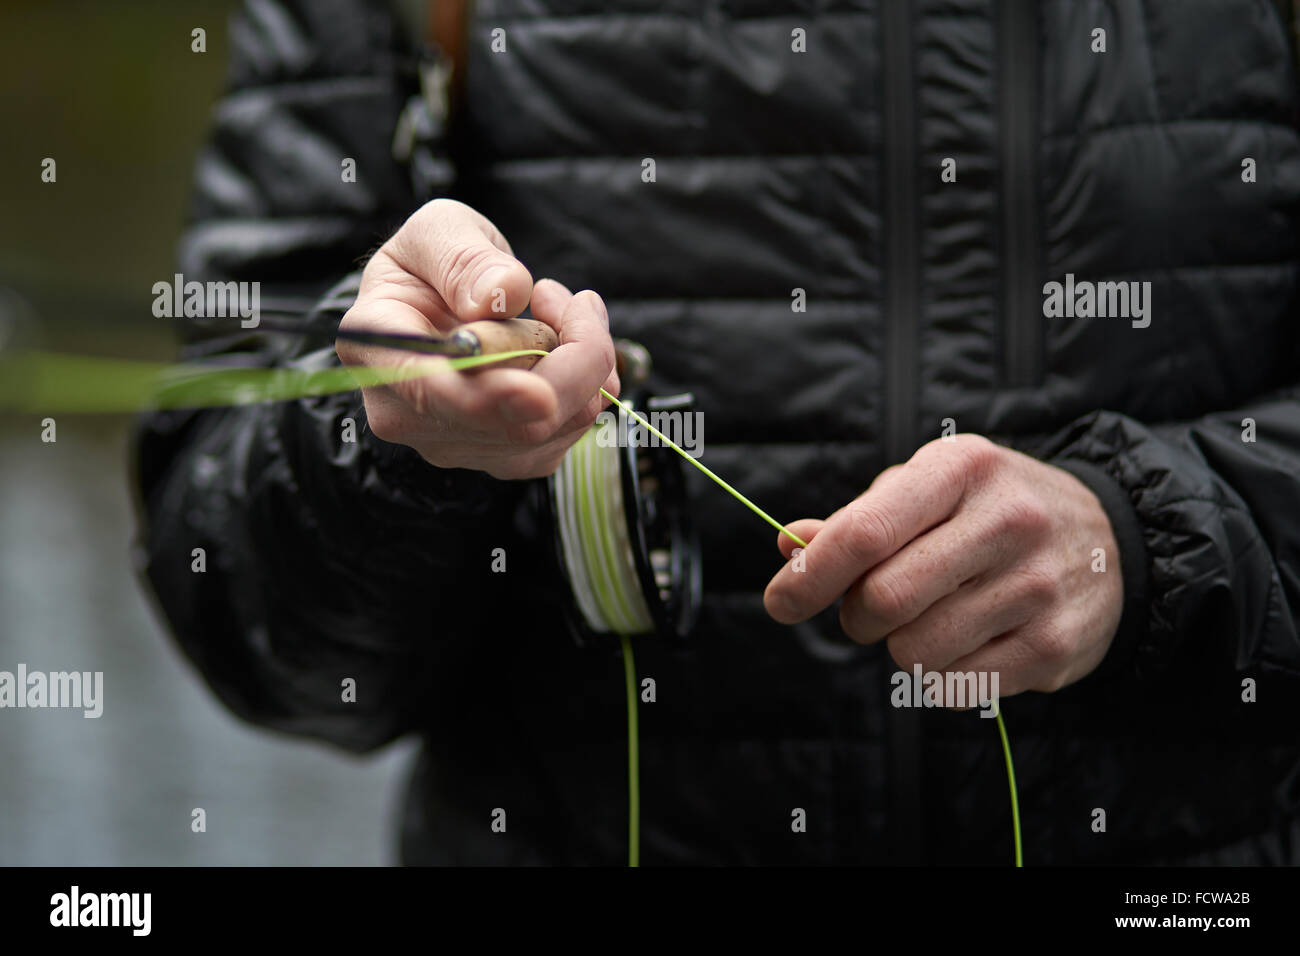 A man fly fishing in a river Stock Photo